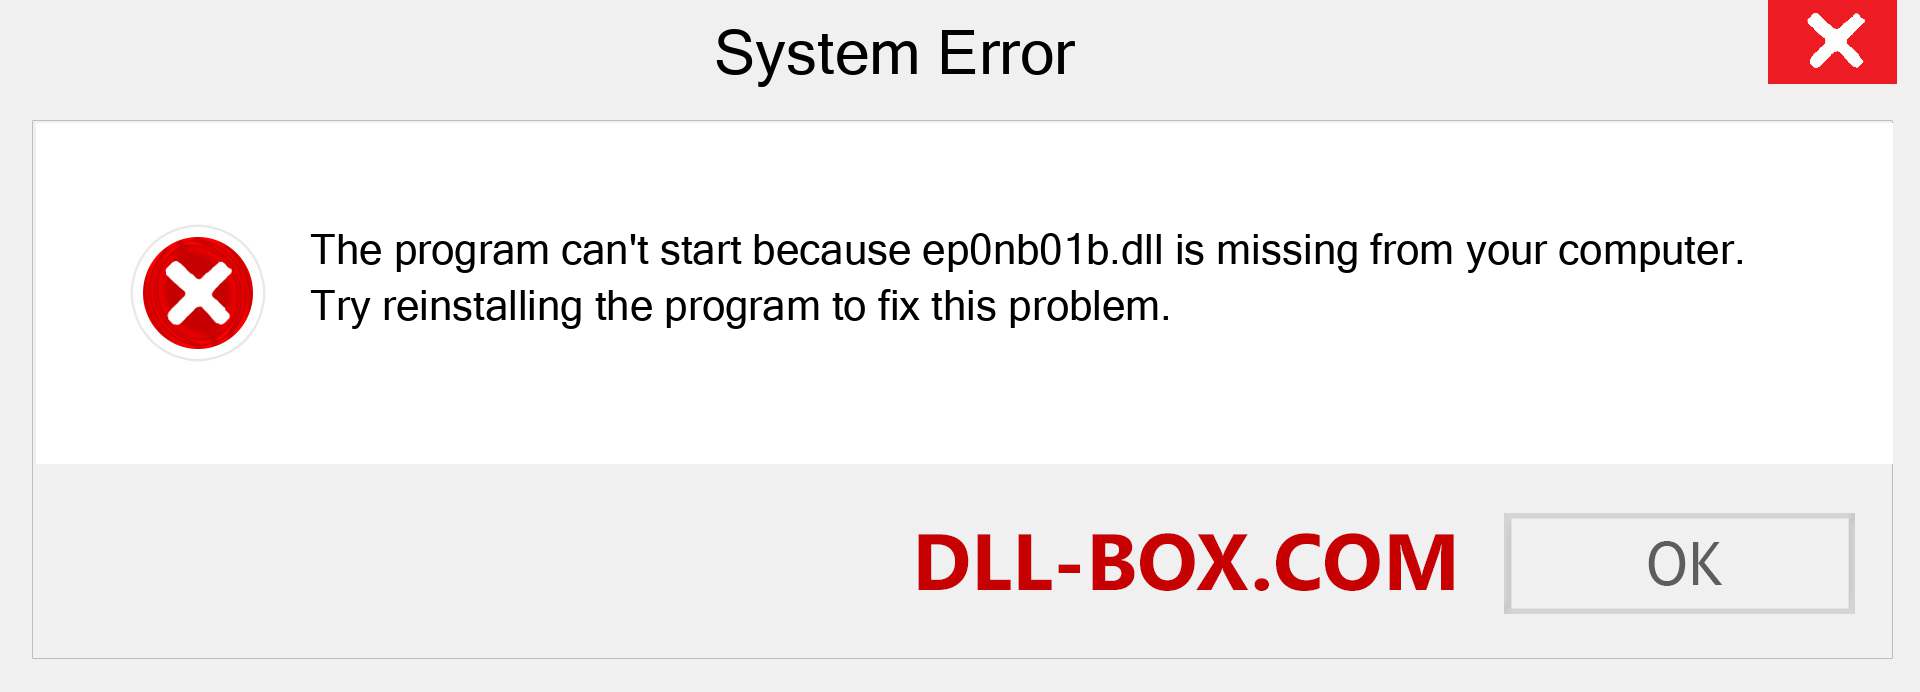  ep0nb01b.dll file is missing?. Download for Windows 7, 8, 10 - Fix  ep0nb01b dll Missing Error on Windows, photos, images